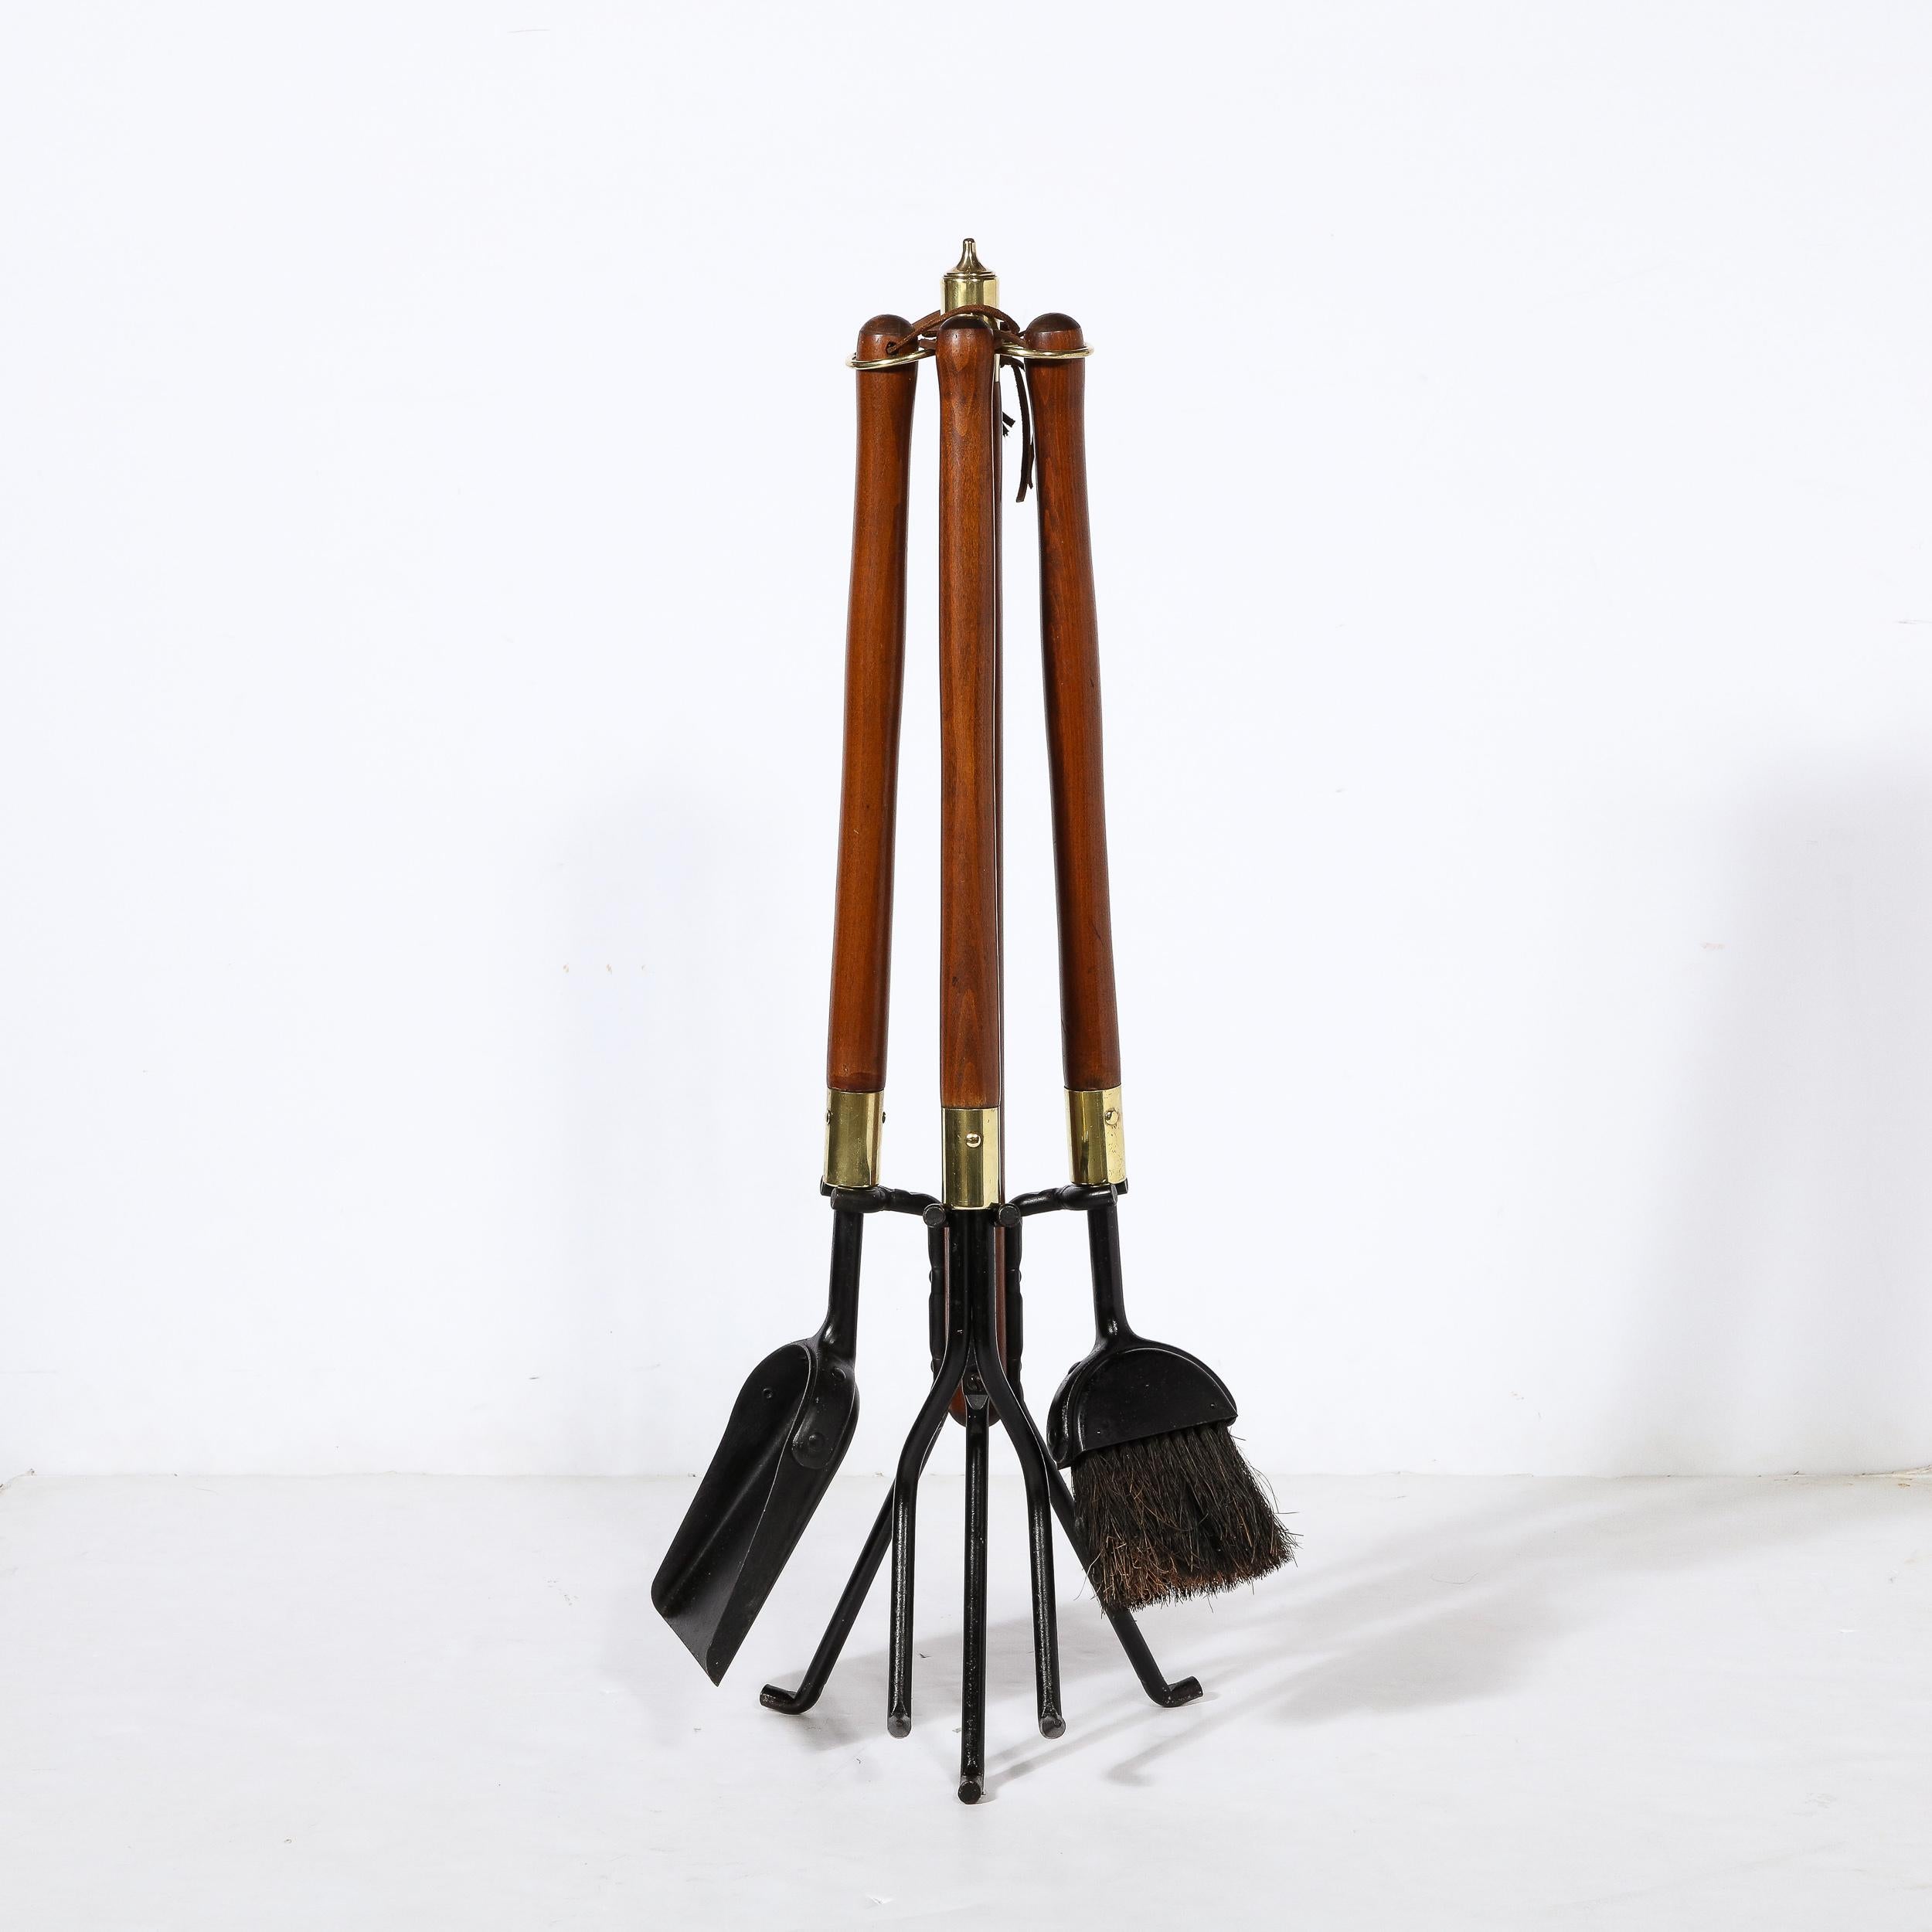 This refined Mid-Century Modern four piece fire tool set was realized in the United States, circa 1960. It features a poker, brush and shovel with hand rubbed walnut handles offering rounded subtly protuberant ends ends, and black enamel bottoms